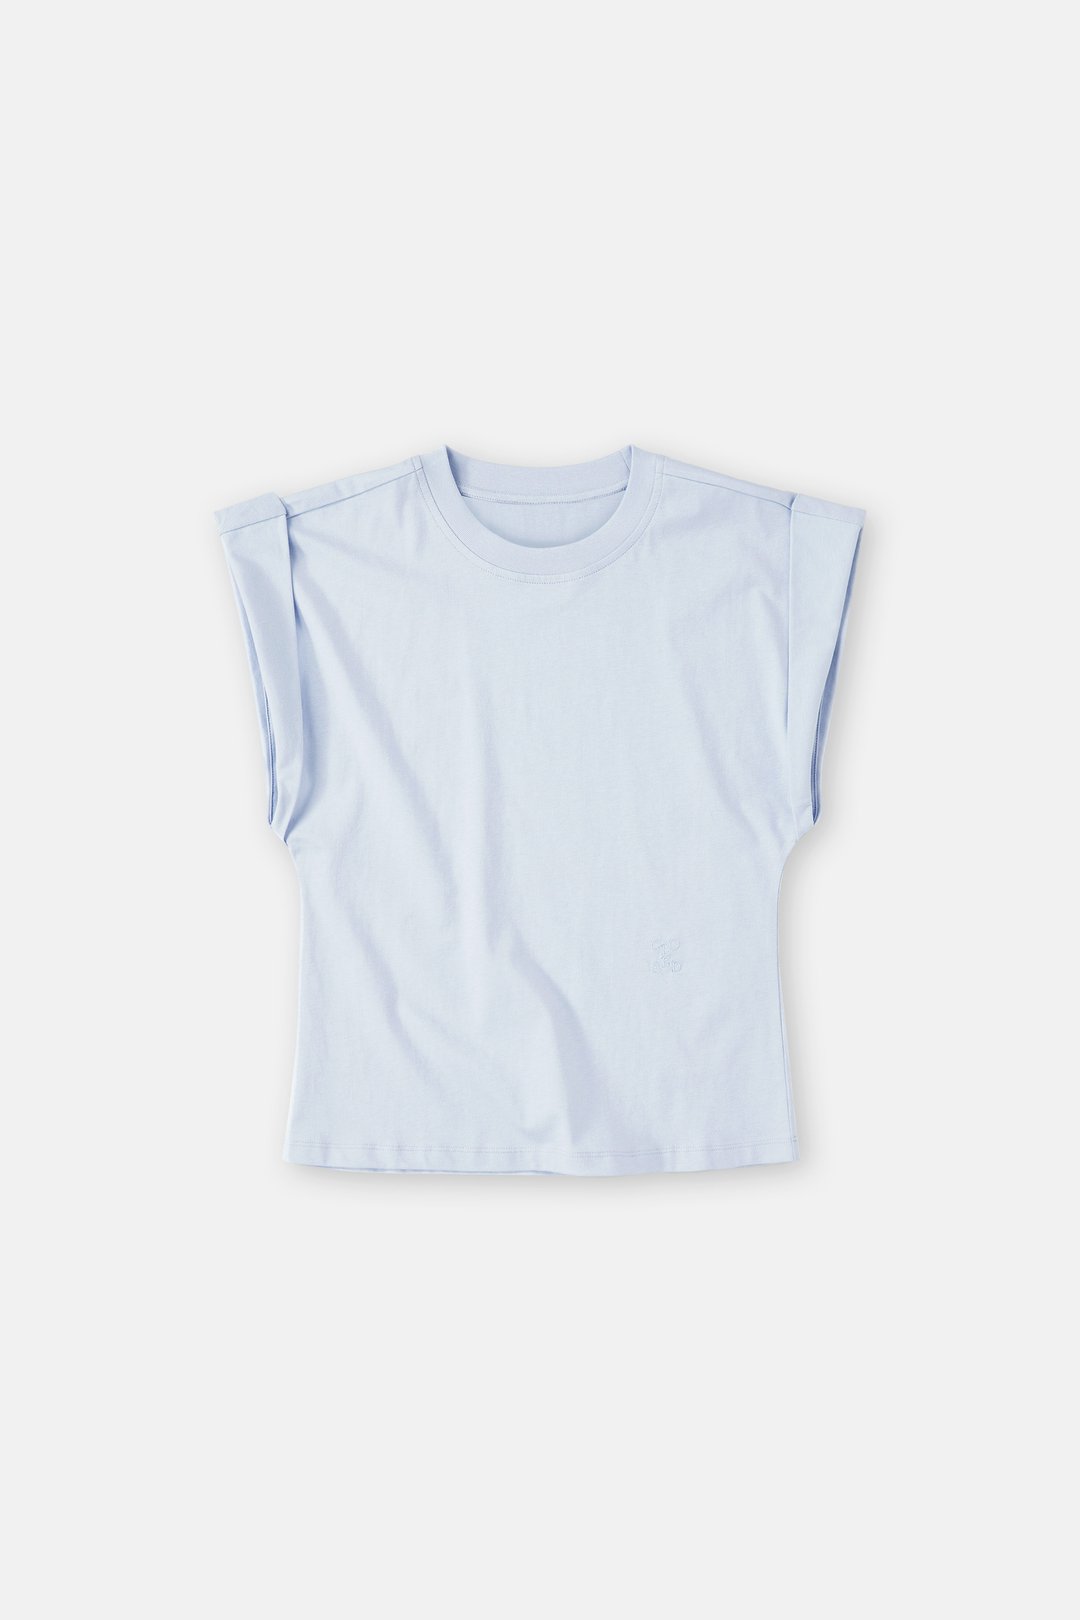 CLOSED SHORT SLEEVE TOP LIGHT BLUE - S. LABELS